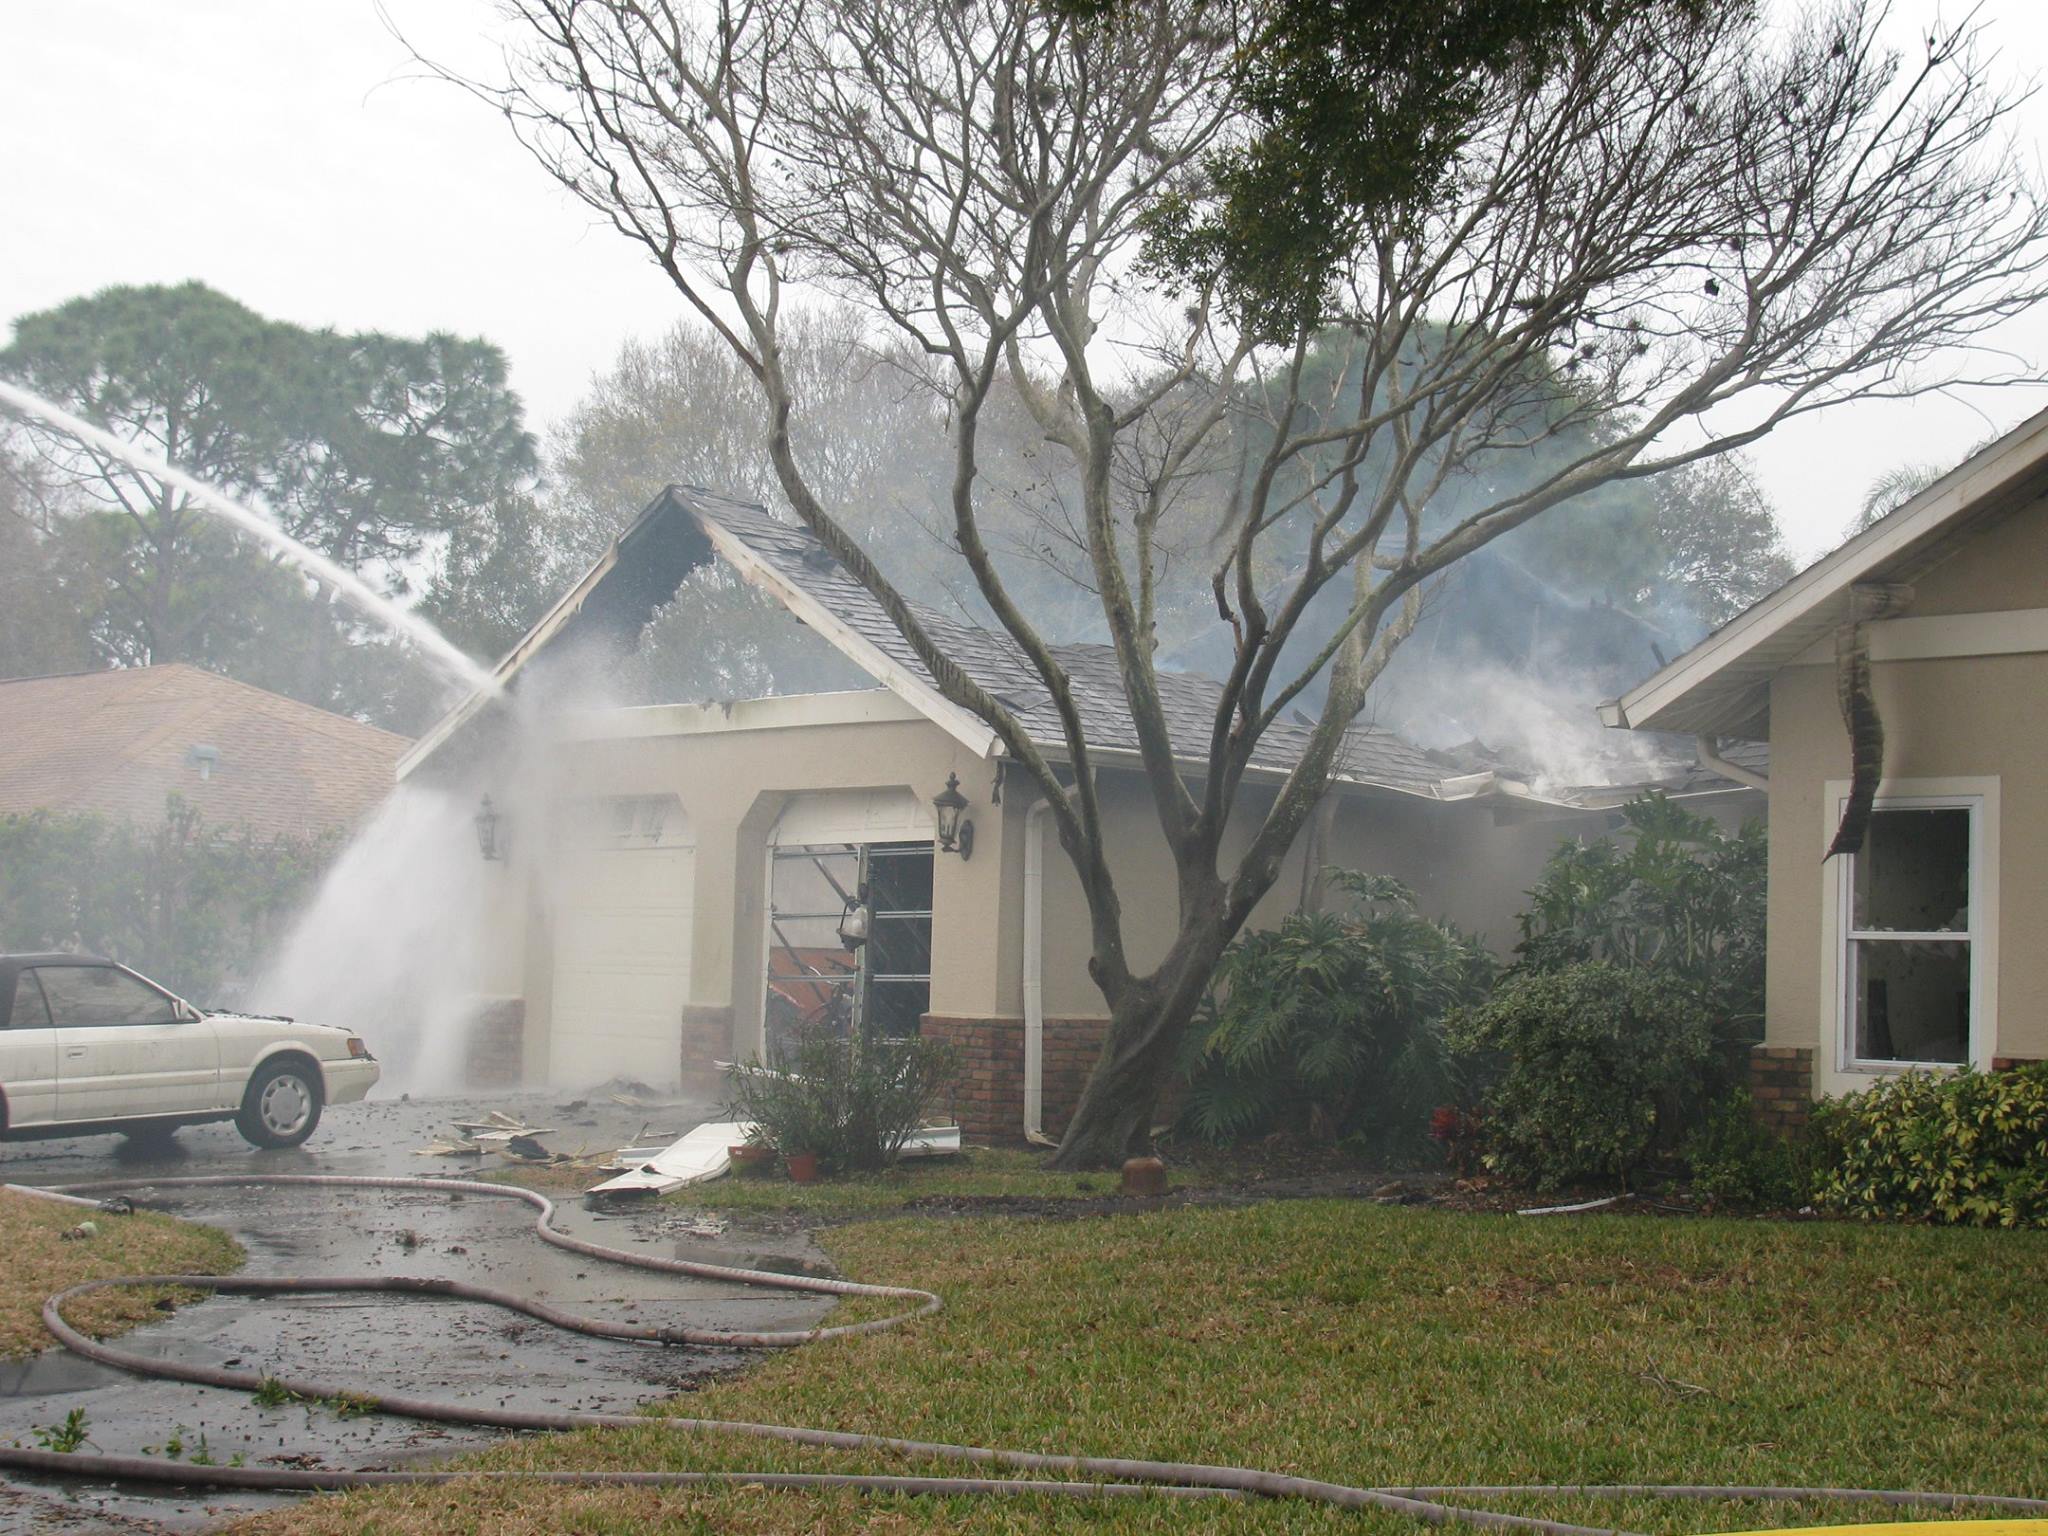 Photo of house being sprayed with water